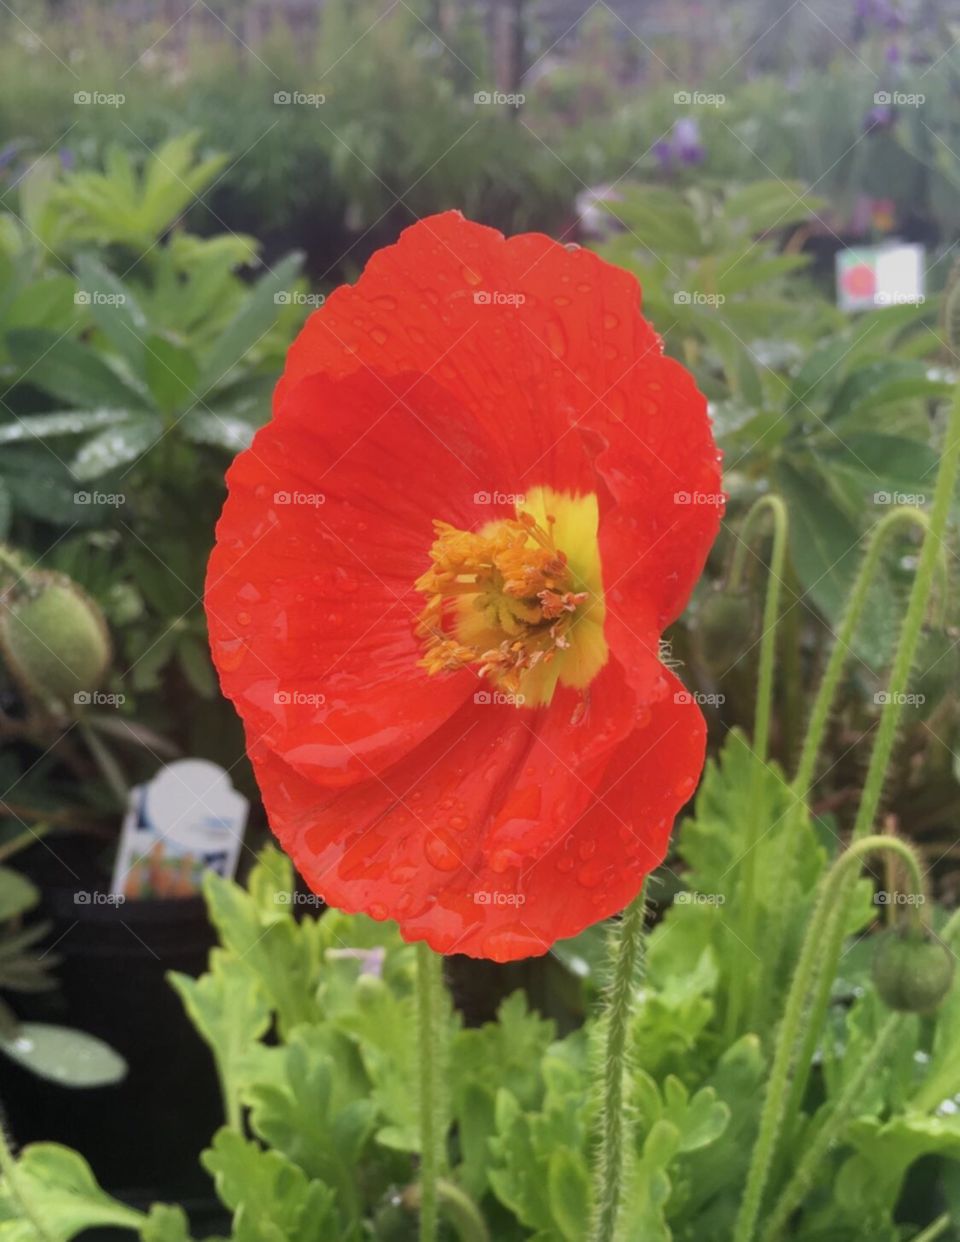 Freshly bloomed red poppy with rainy dewdrops on it and green foliage in background